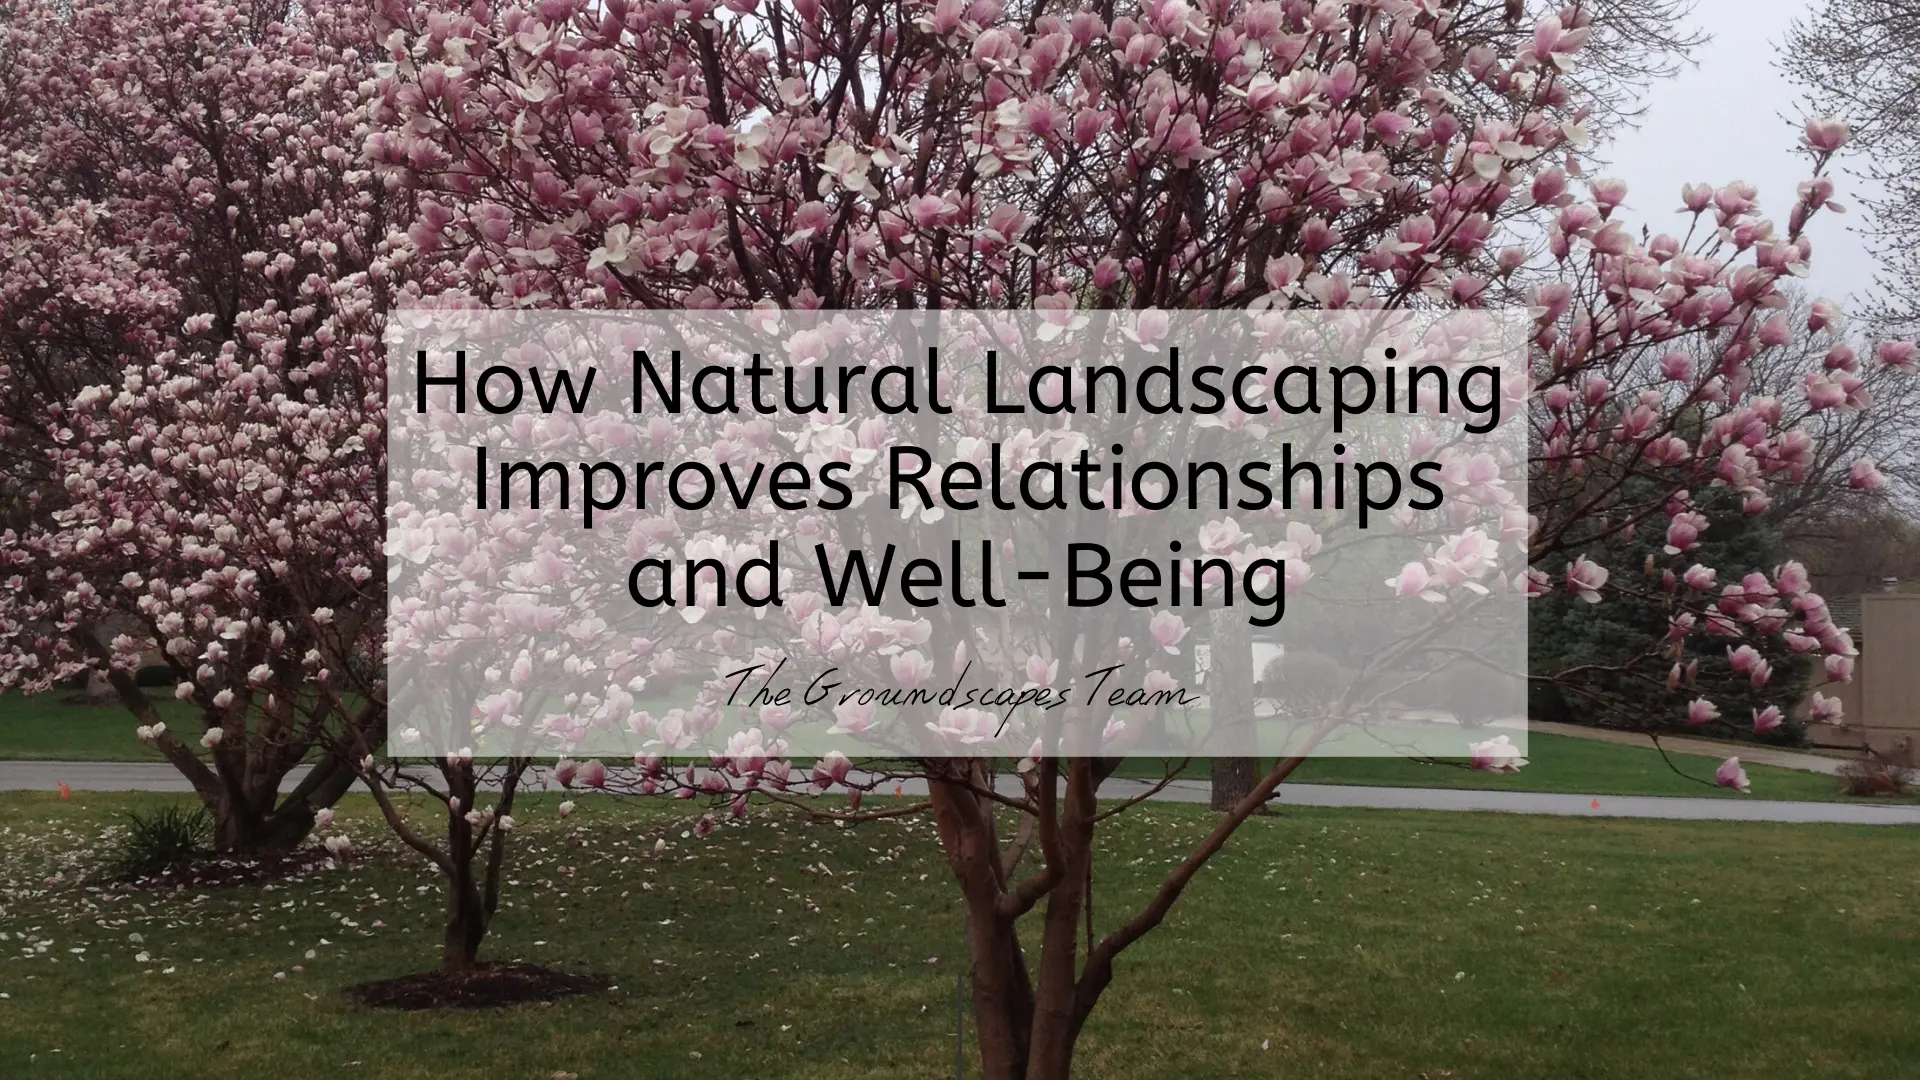 How Natural Landscaping Improves Relationships and Well-Being